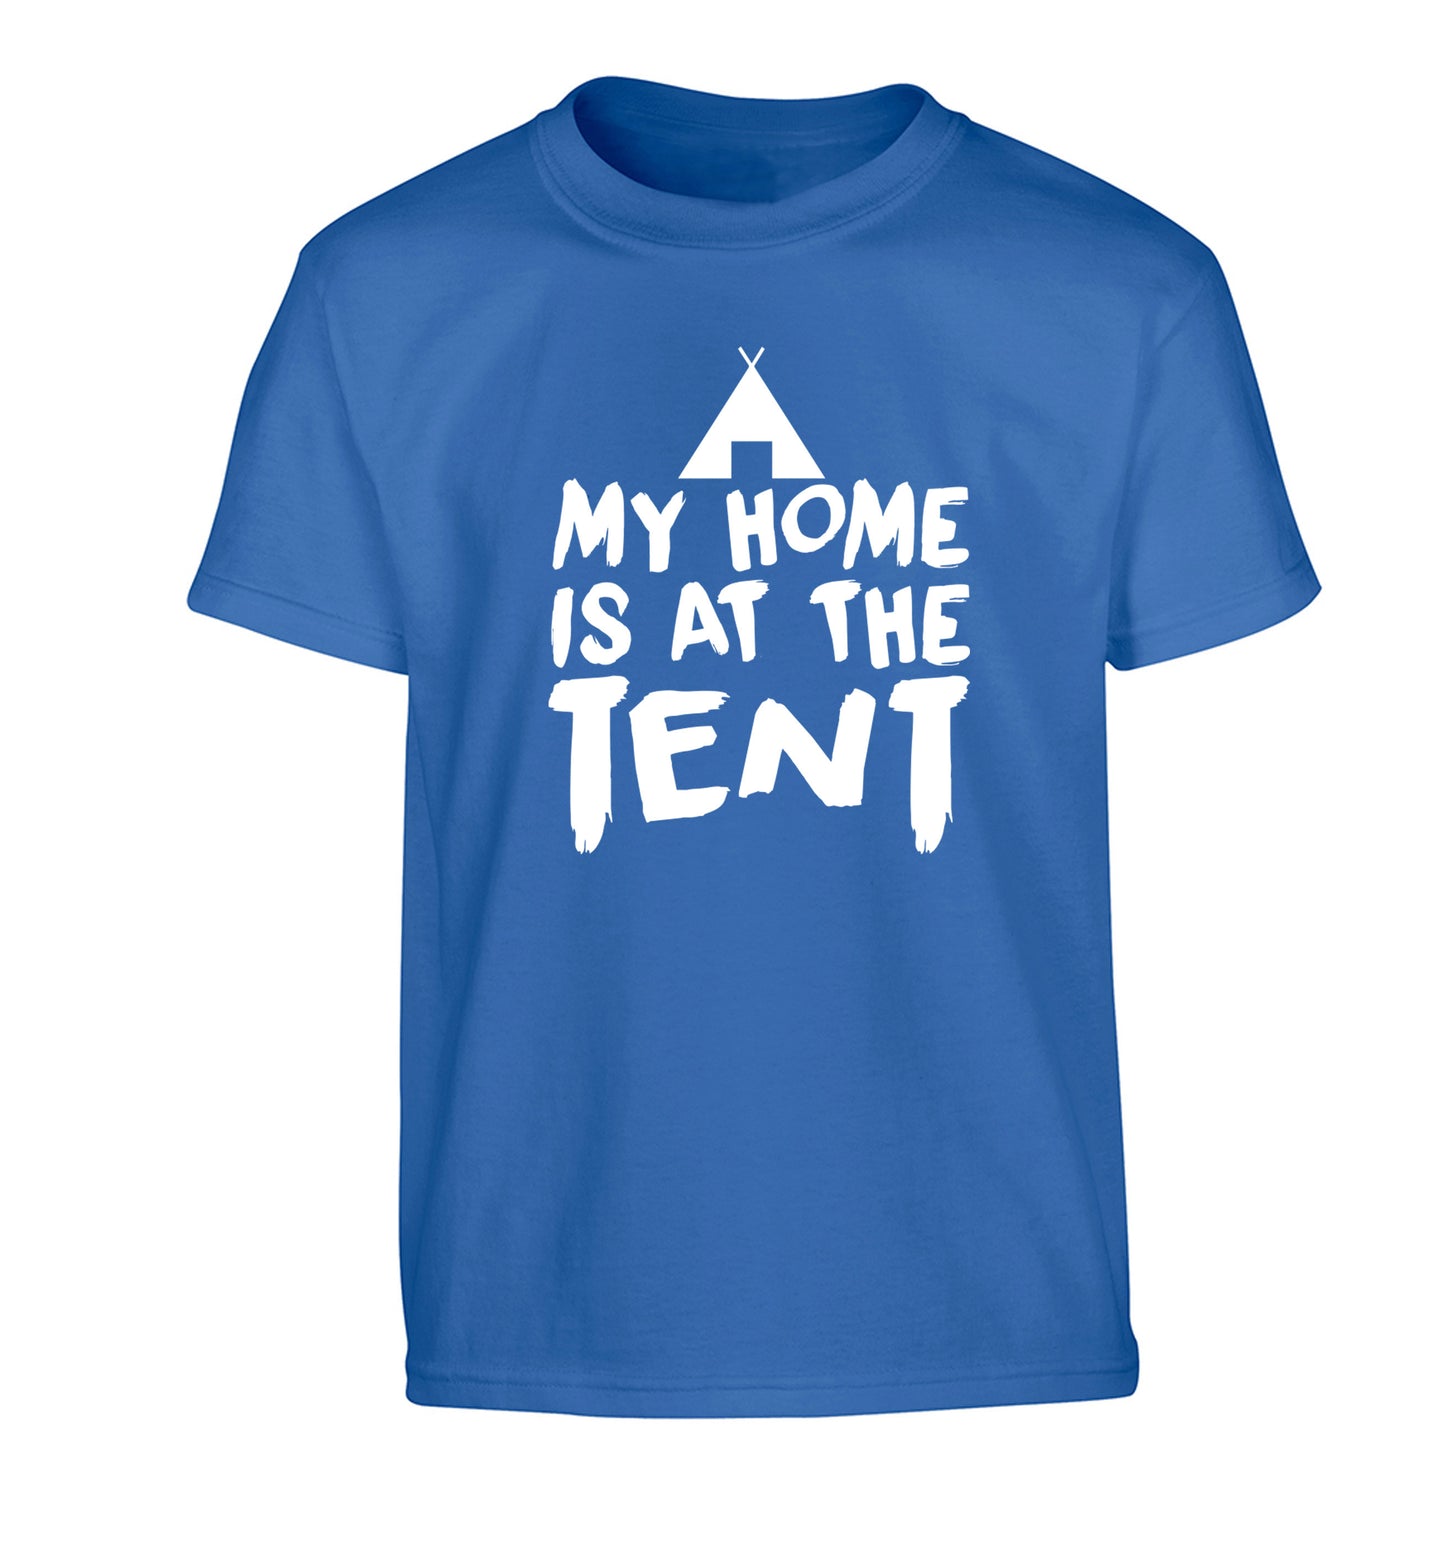 My home is at the tent Children's blue Tshirt 12-14 Years